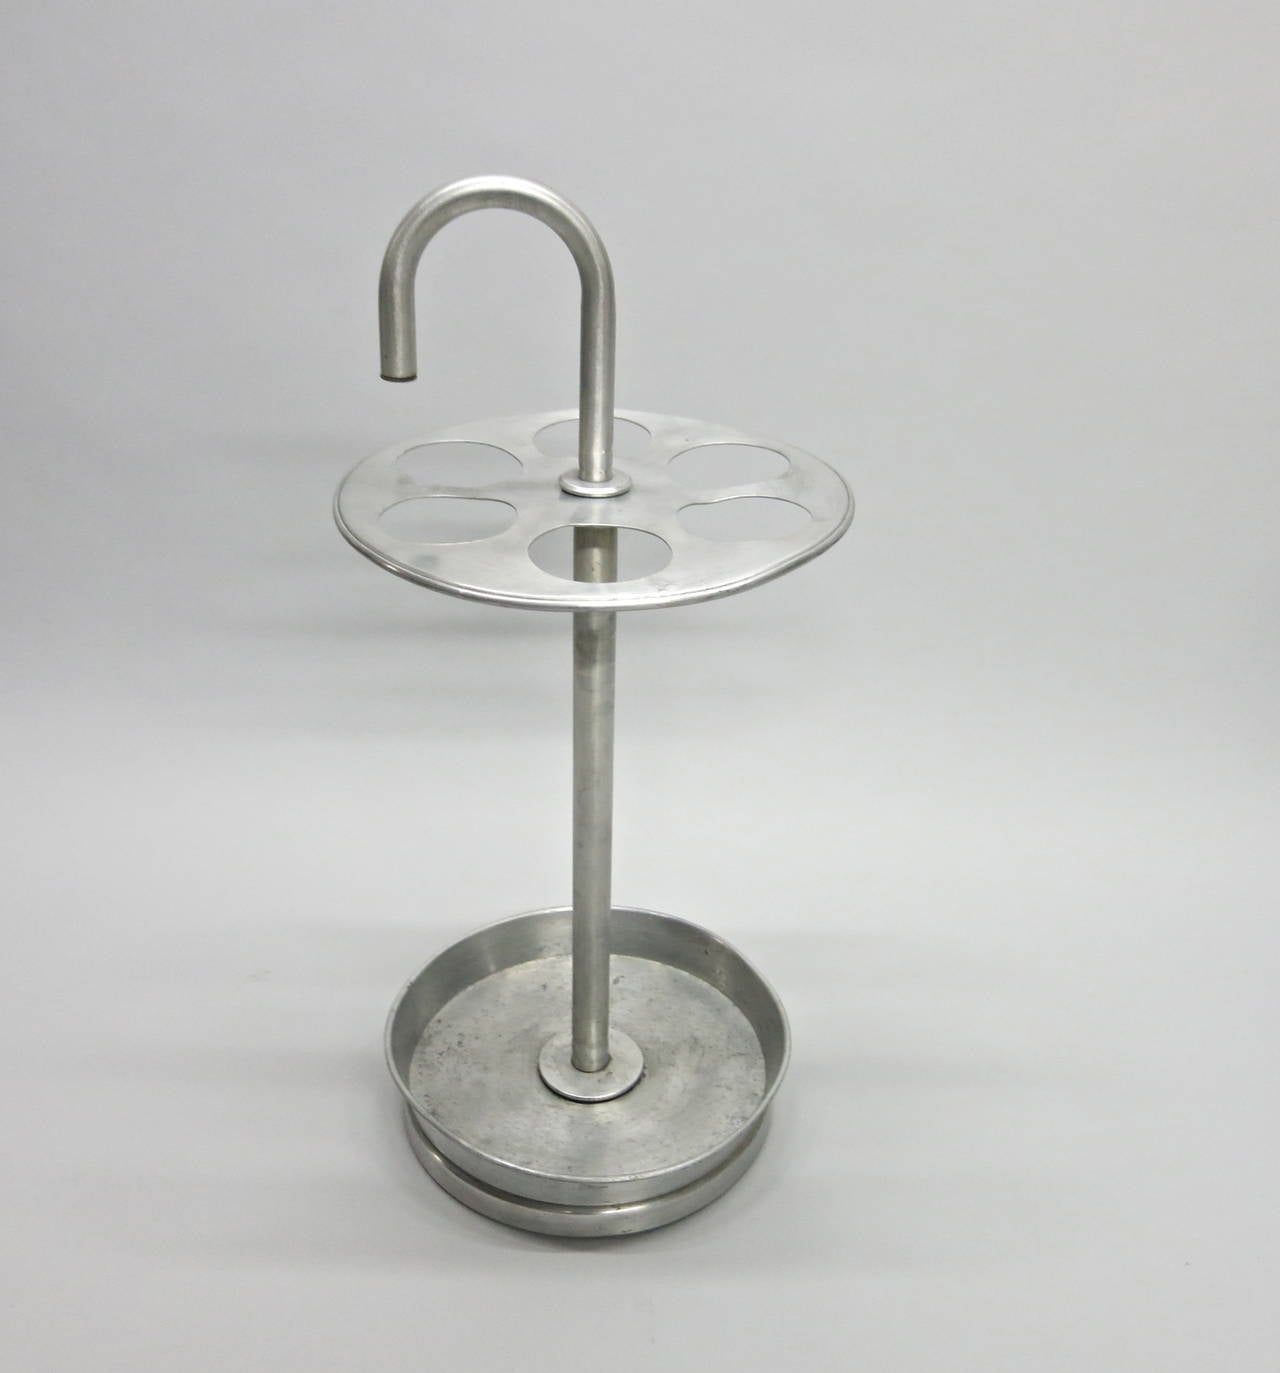 Umbrella Stand in anodized aluminum with a cane handle and a round weighted base able to hold six umbrellas